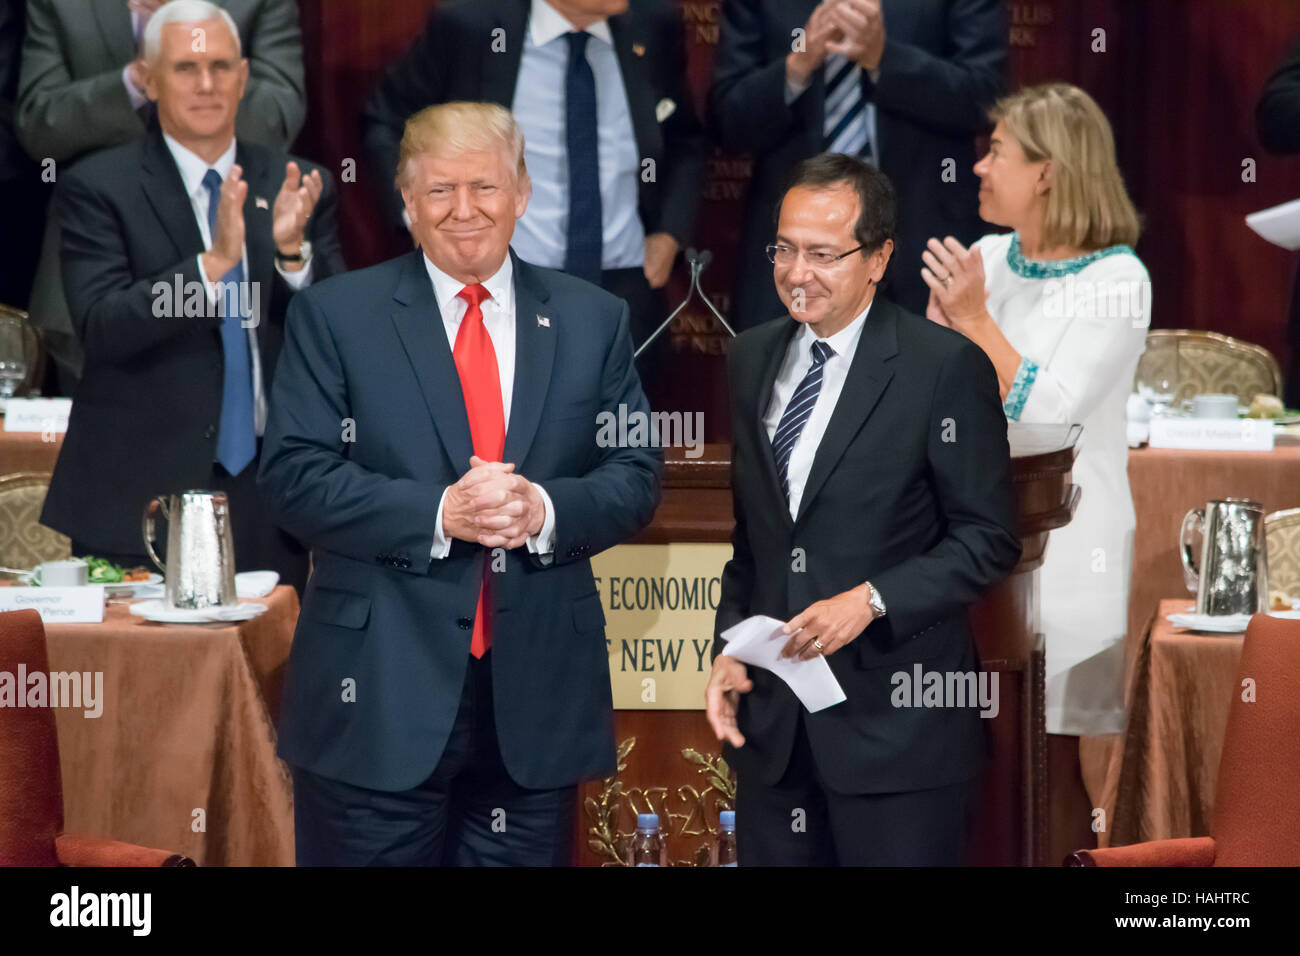 Donald Trump and John Paulson at the conclusion of a speech. Stock Photo